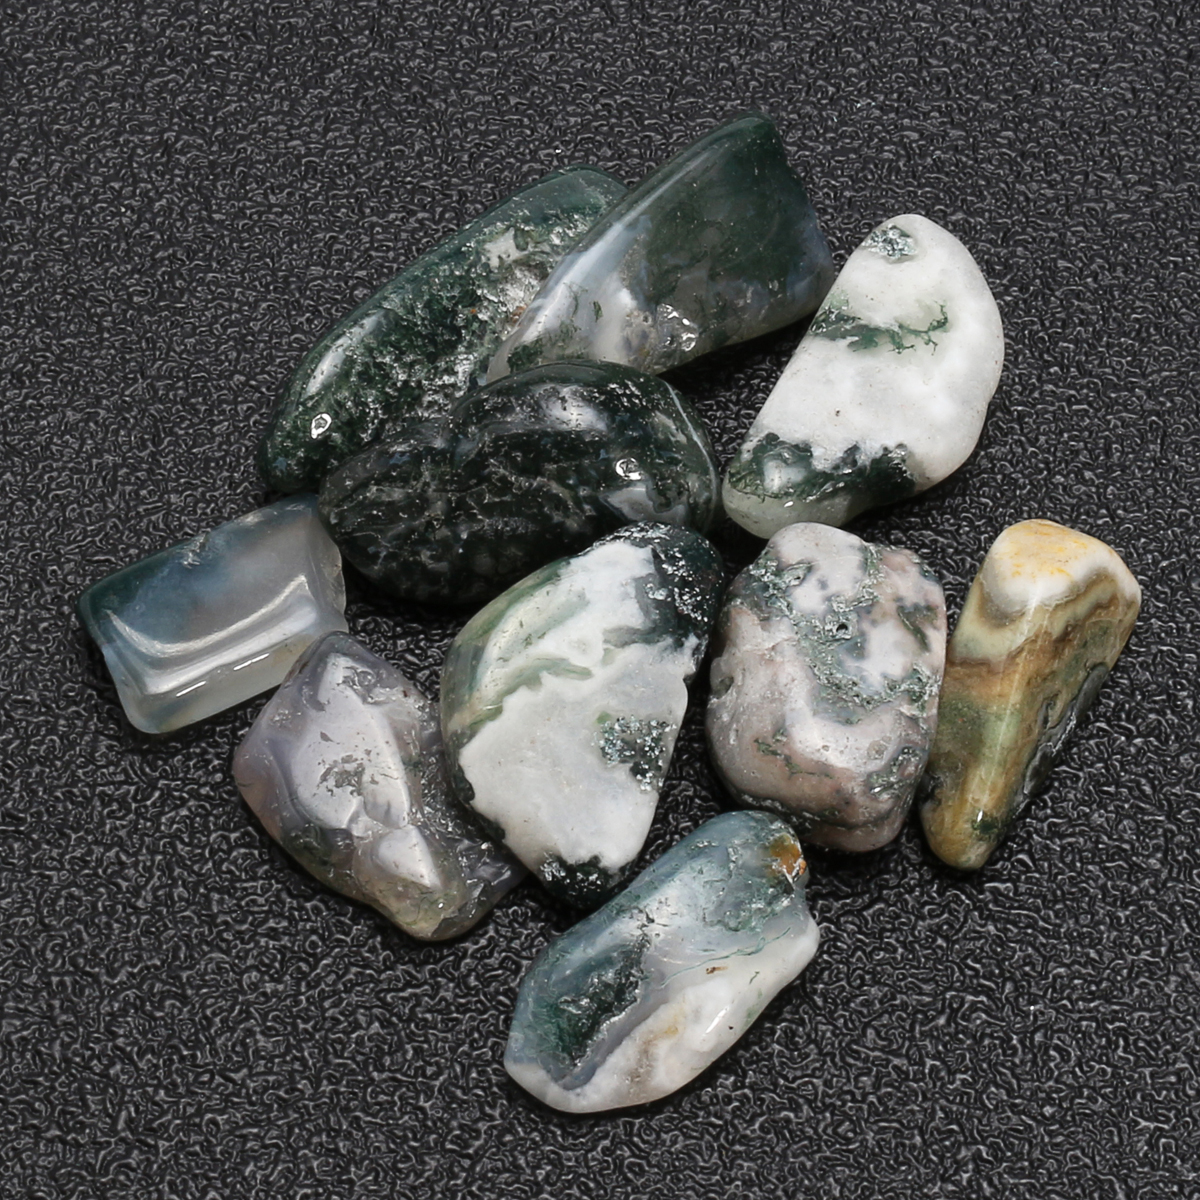 10-Pcs-of-Natural-Stone-Moss-Agate-Crystal-DIY-Jewelry-1149440